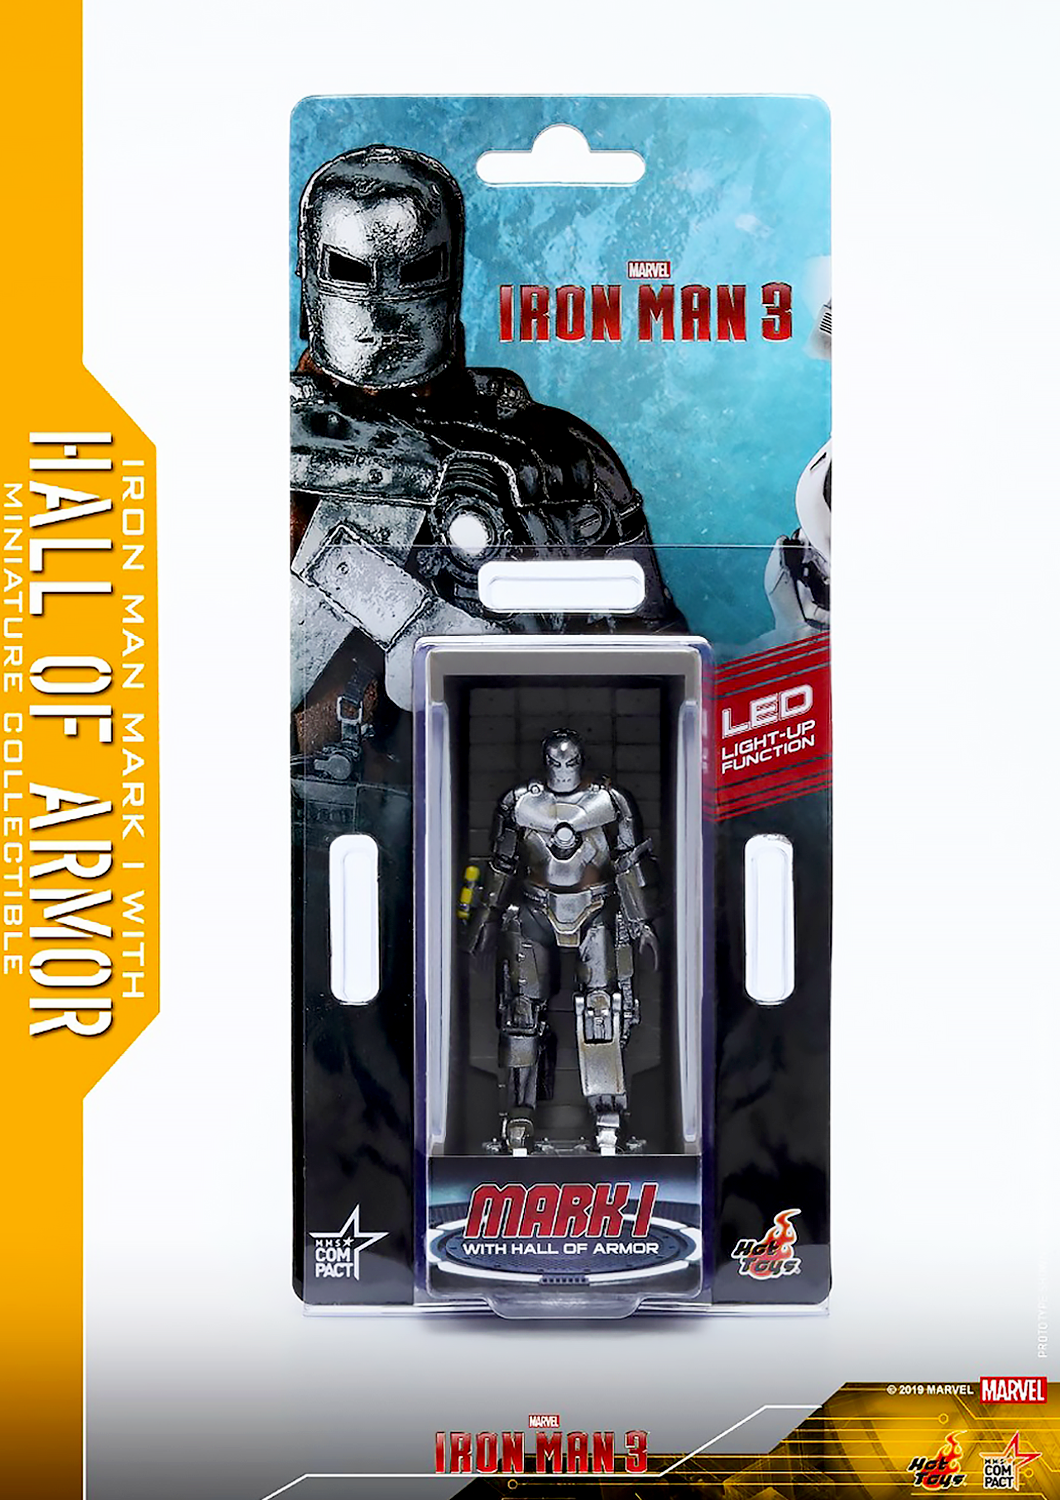 HOT TOYS MARVEL IRON MAN MARK I - MARK 1 WITH HALL OF ARMOR MINIATURE COLLECTIBLE MMSC005 - Anotoys Collectibles